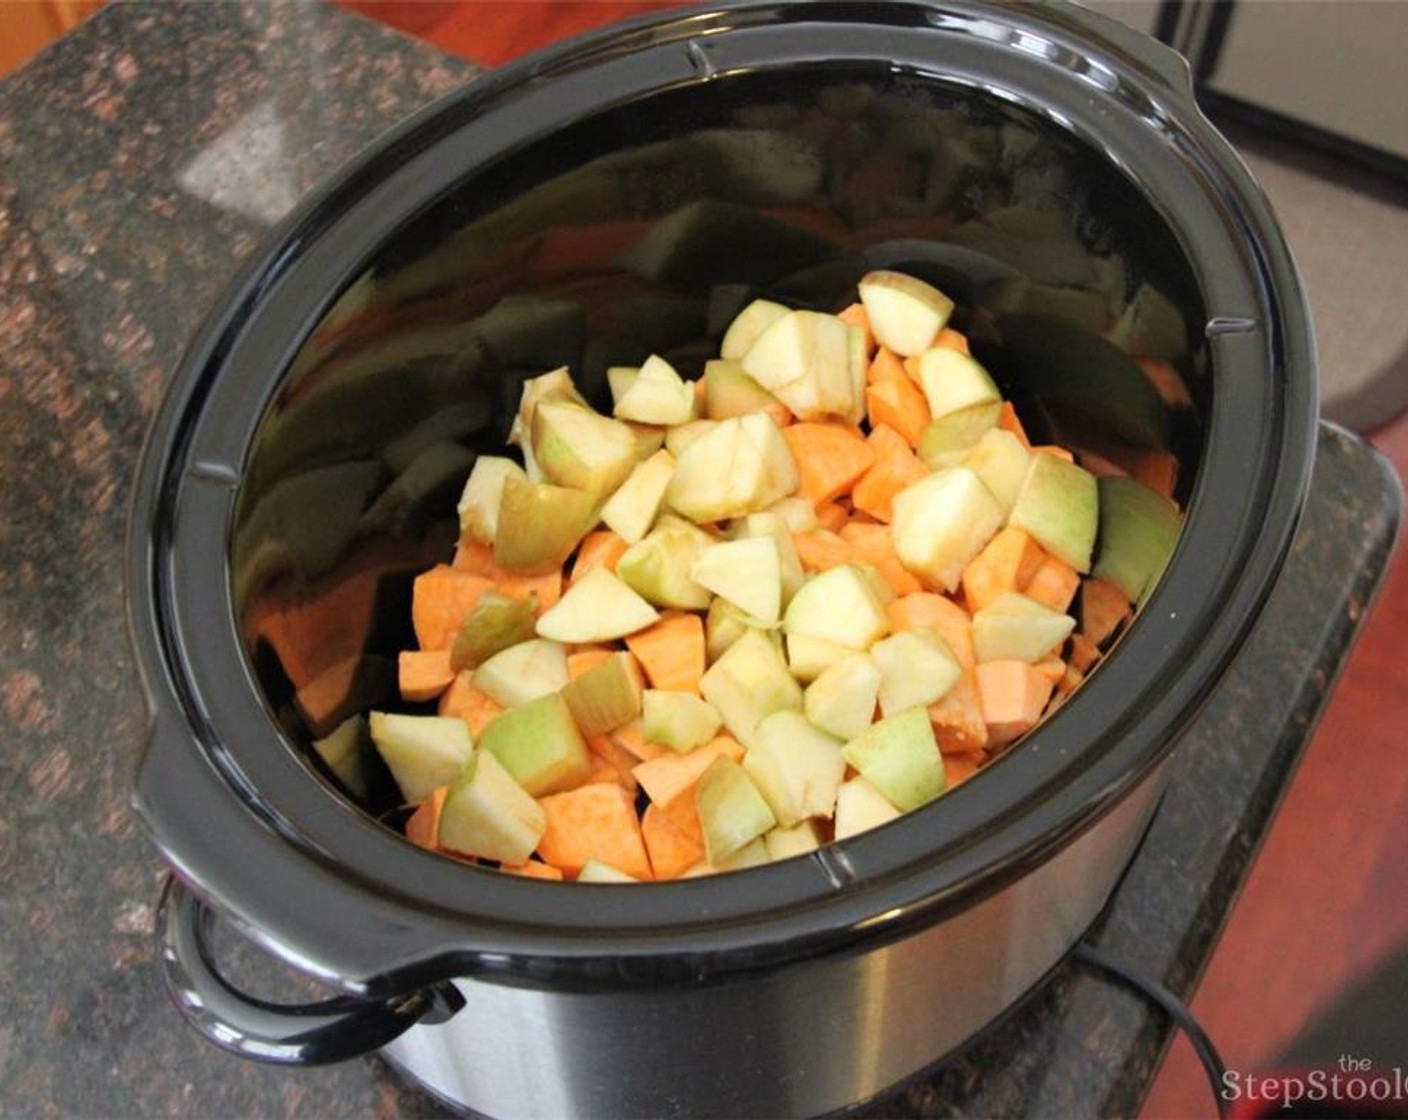 step 1 Cube Sweet Potatoes (3) and Apples (3) and place them in a slow cooker. Add Low-Sodium Chicken Broth (3 cups), Apple Cider (1 cup), Ground Cinnamon (1/2 Tbsp), Brown Sugar (1 Tbsp), Lemon (1) juice, and Sage Leaves (1 Tbsp). Cook on low heat for 5 to 6 hours.